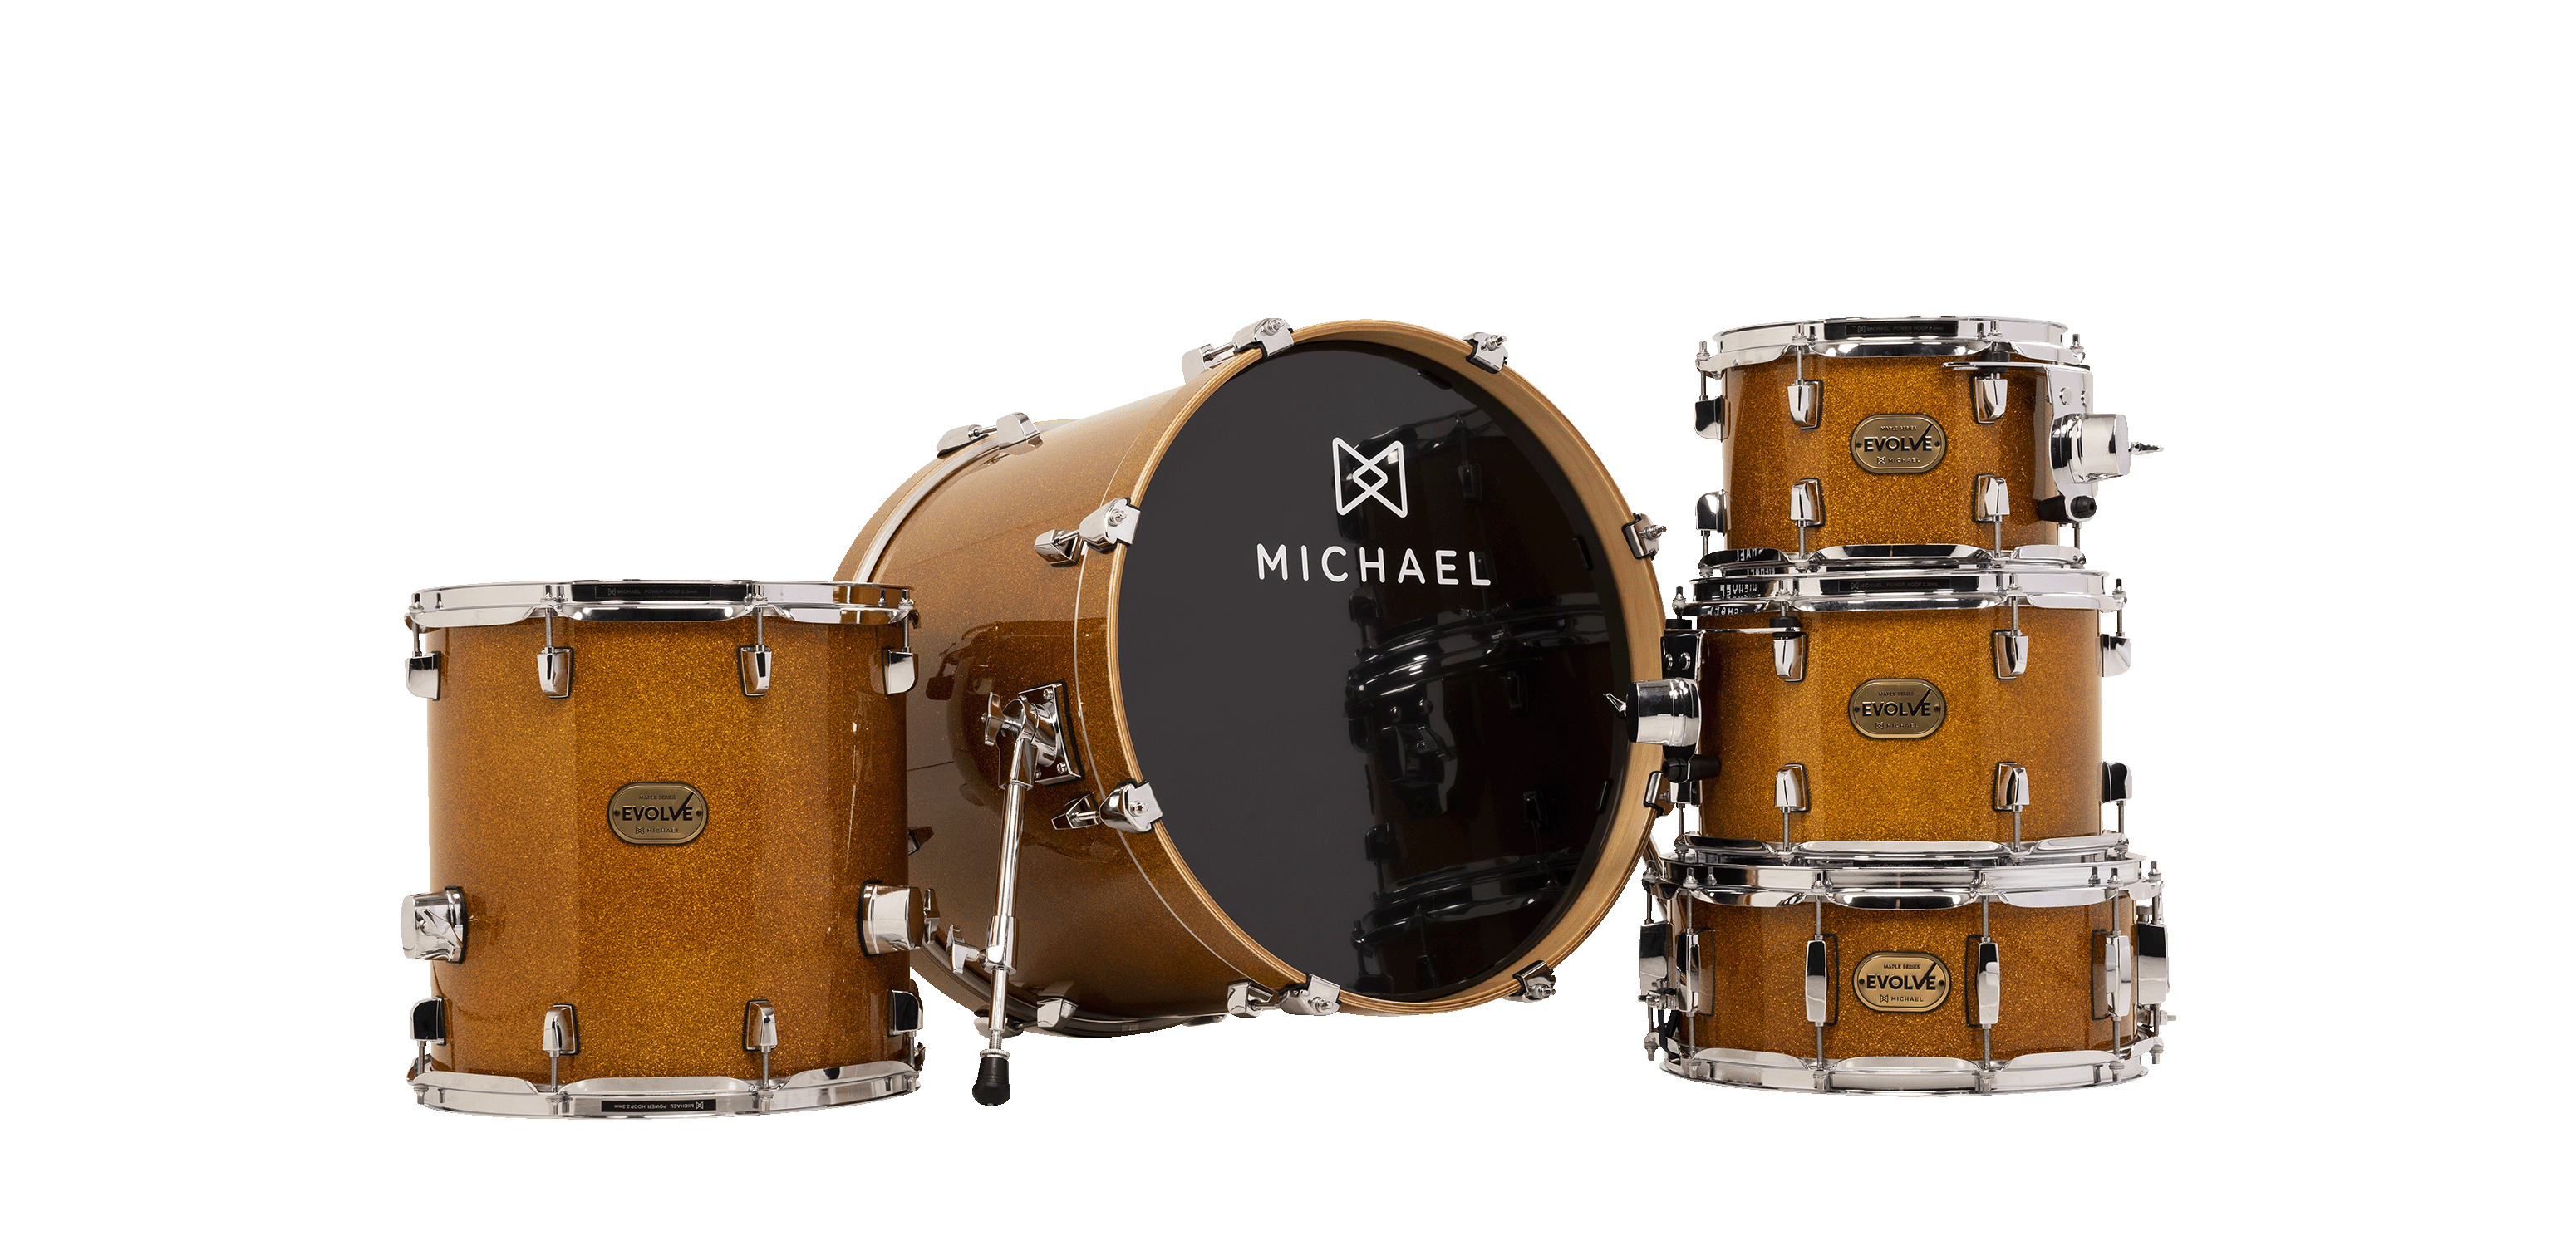 BATERIA MICHAEL EVOLVE DME620 BUMBO 20" (SHELL PACK)